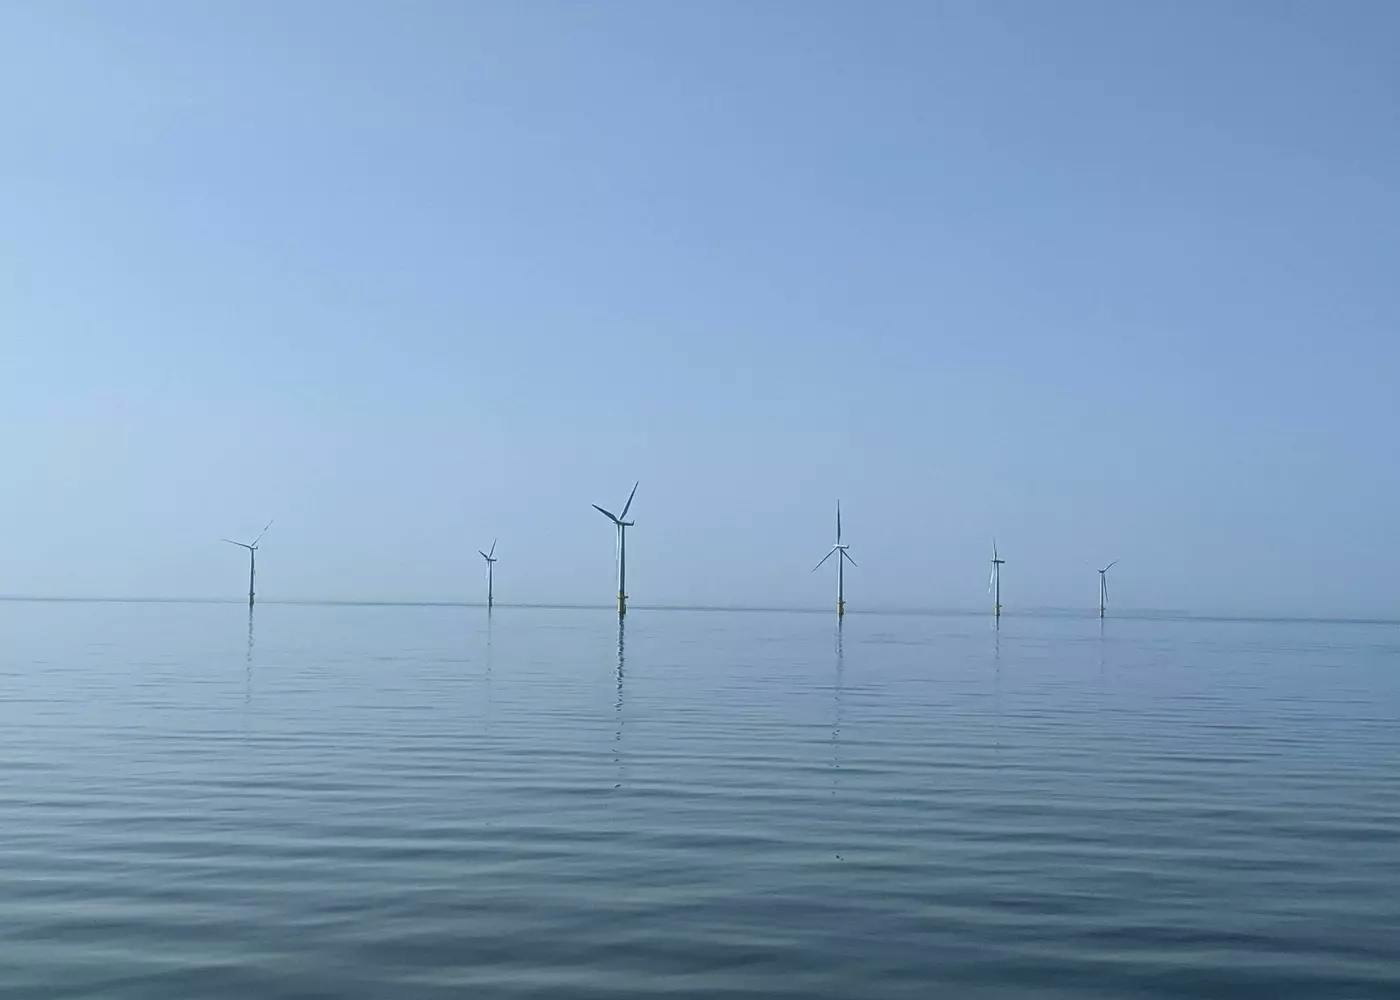 Taken from Jack-Up JB-119. This photo captured the wind turbines in daylight when the sky and sea have the same colour tone